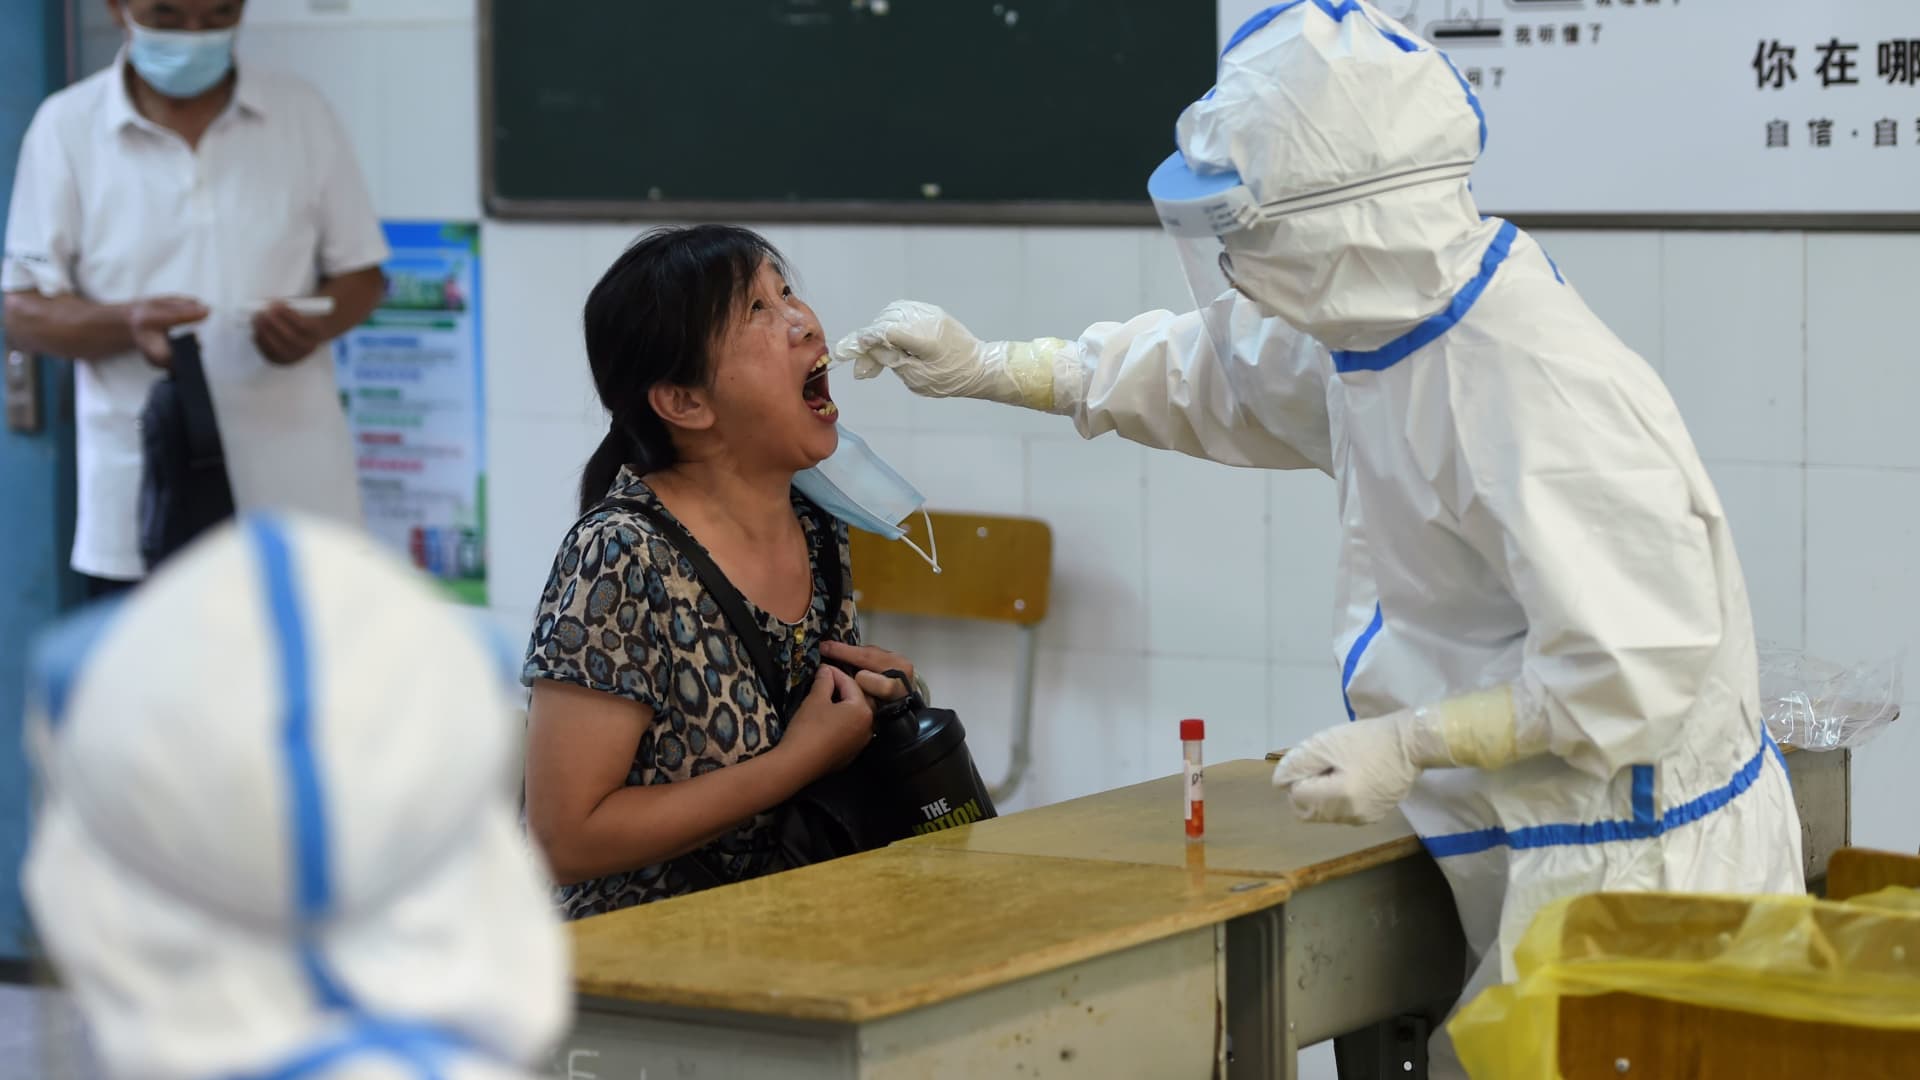 A medical worker in a protective suit collects a swab from a resident during a citywide nucleic acid testing following new cases of the coronavirus disease (COVID-19) in Wuhan, Hubei province, China, August 3, 2021.